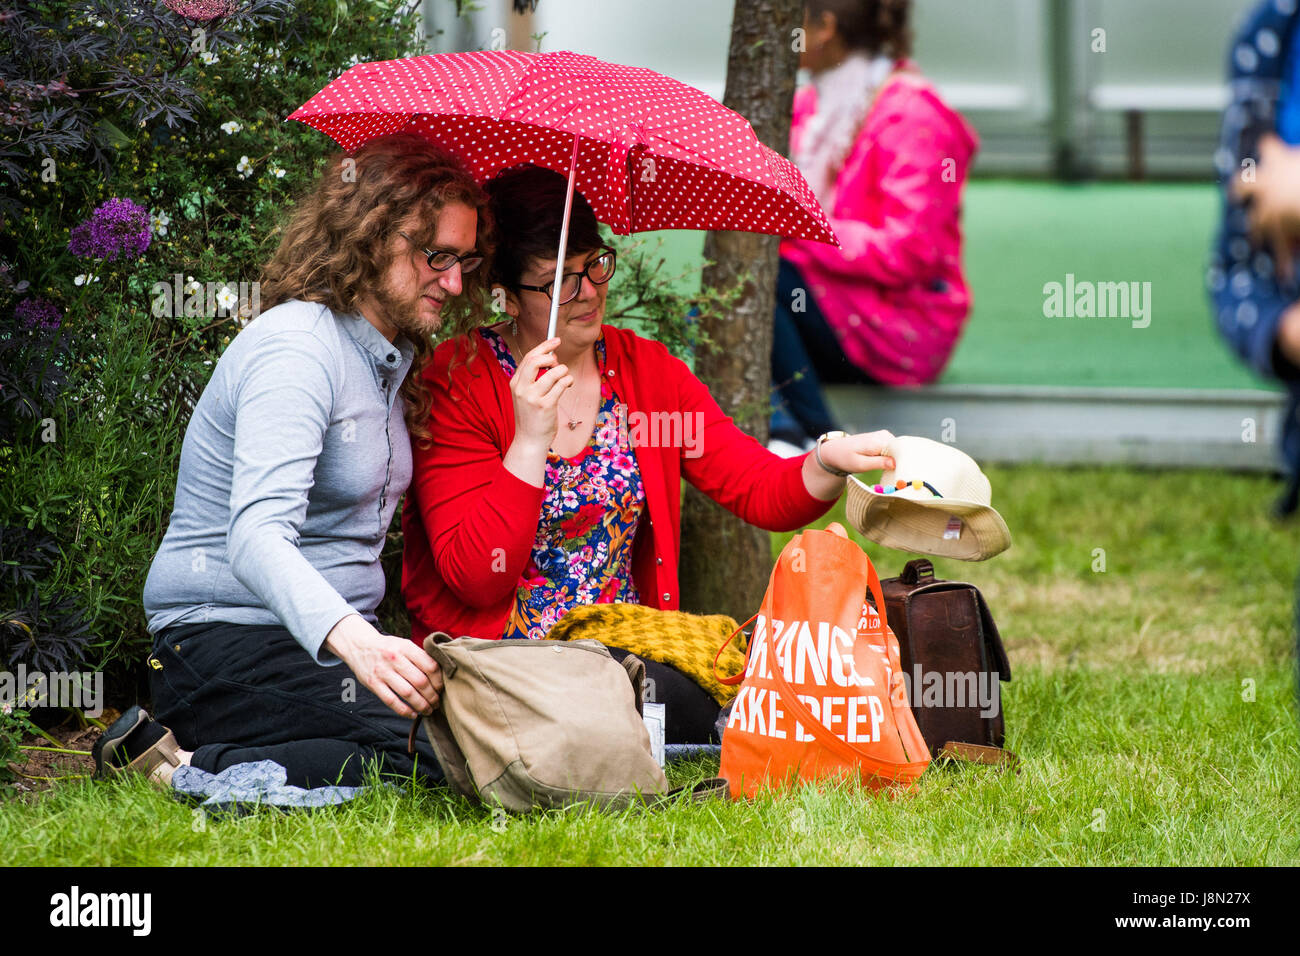 Hay Festival, Wales UK, Monday 29 May 2017 A happy couple share a picnic under theur umbrella in the light rain at the 2017 Hay Literature Festival Now in its 30th year, the festival draws tens of thousand of visitors a day to what was described by former US president Bill Clinton as 'the woodstock of the mind' Photo credit Credit: Keith Morris/Alamy Live News Stock Photo